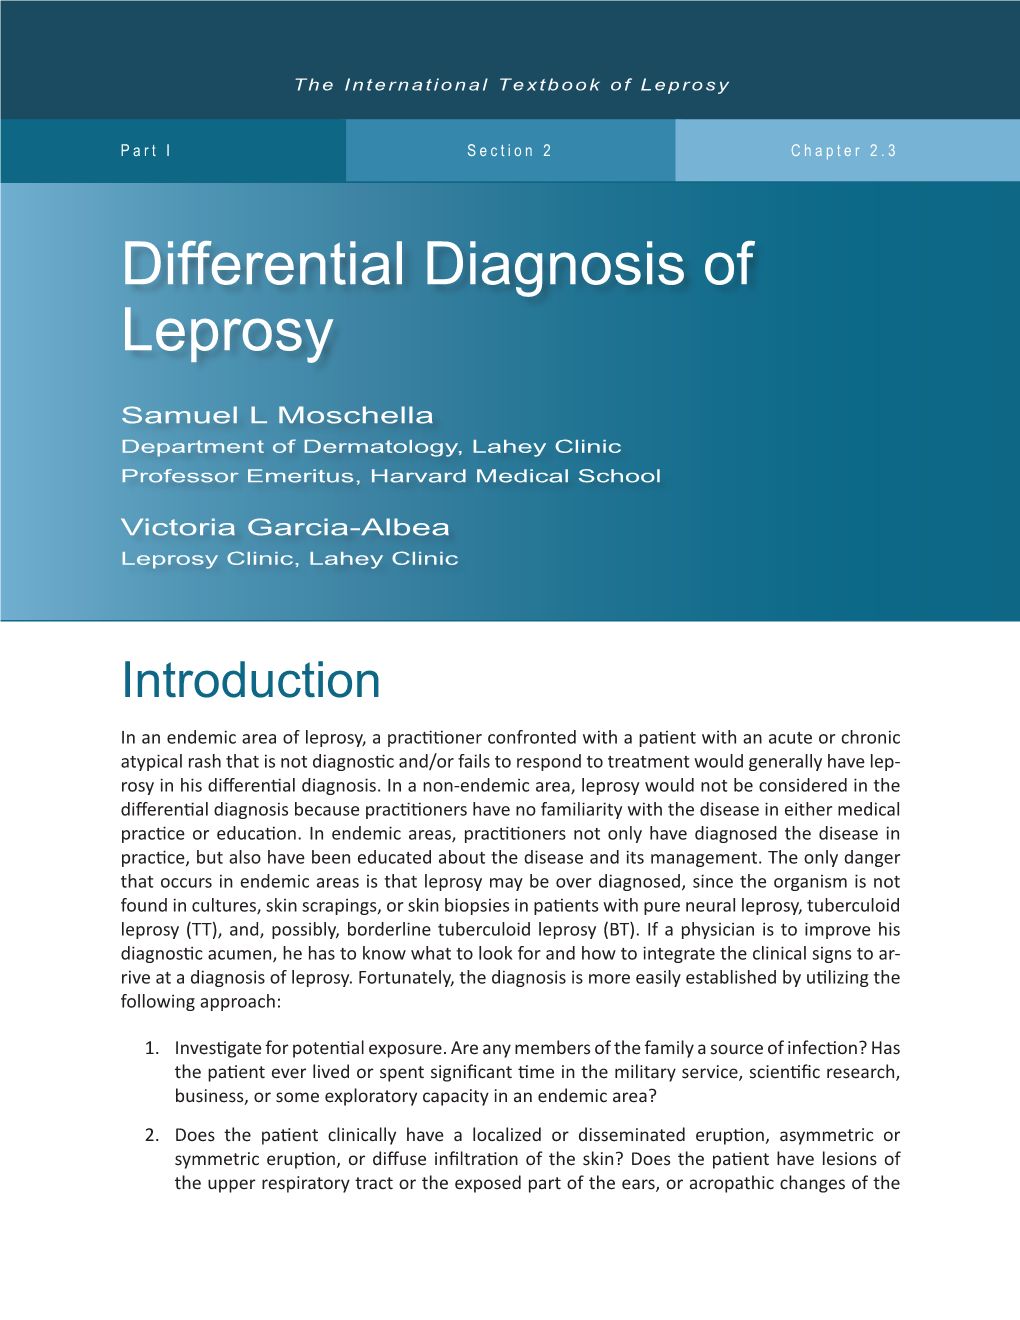 Differential Diagnosis of Leprosy